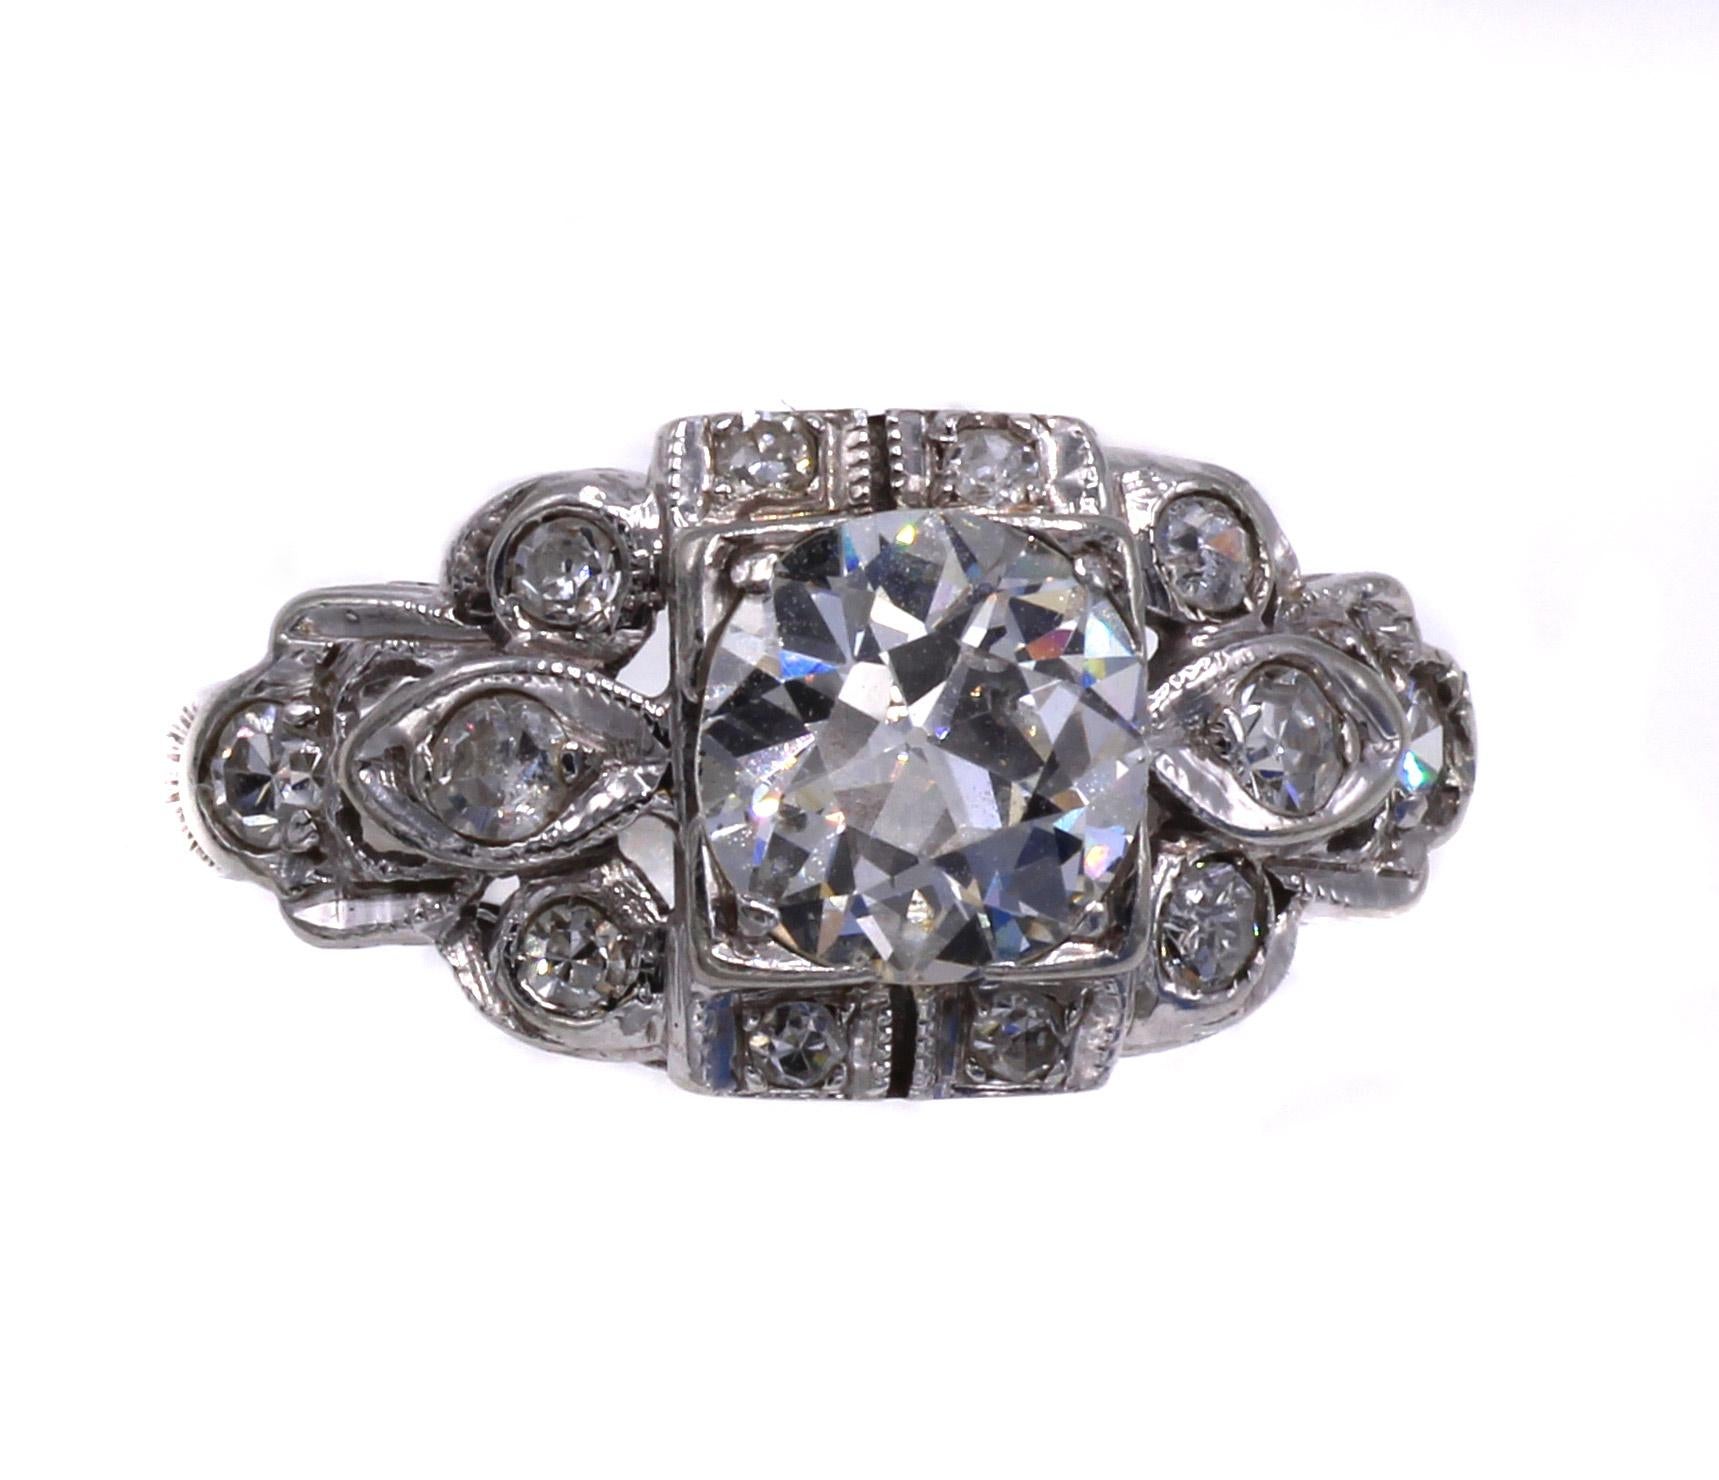 Gorgeous Art Deco engagement ring centrally set with on lively Old European Cut diamond measured to weigh approximately 0.75 carats. Our inhouse certified gemmologist has graded the color J and the clarity SI. Further embellished by 12 old cut round